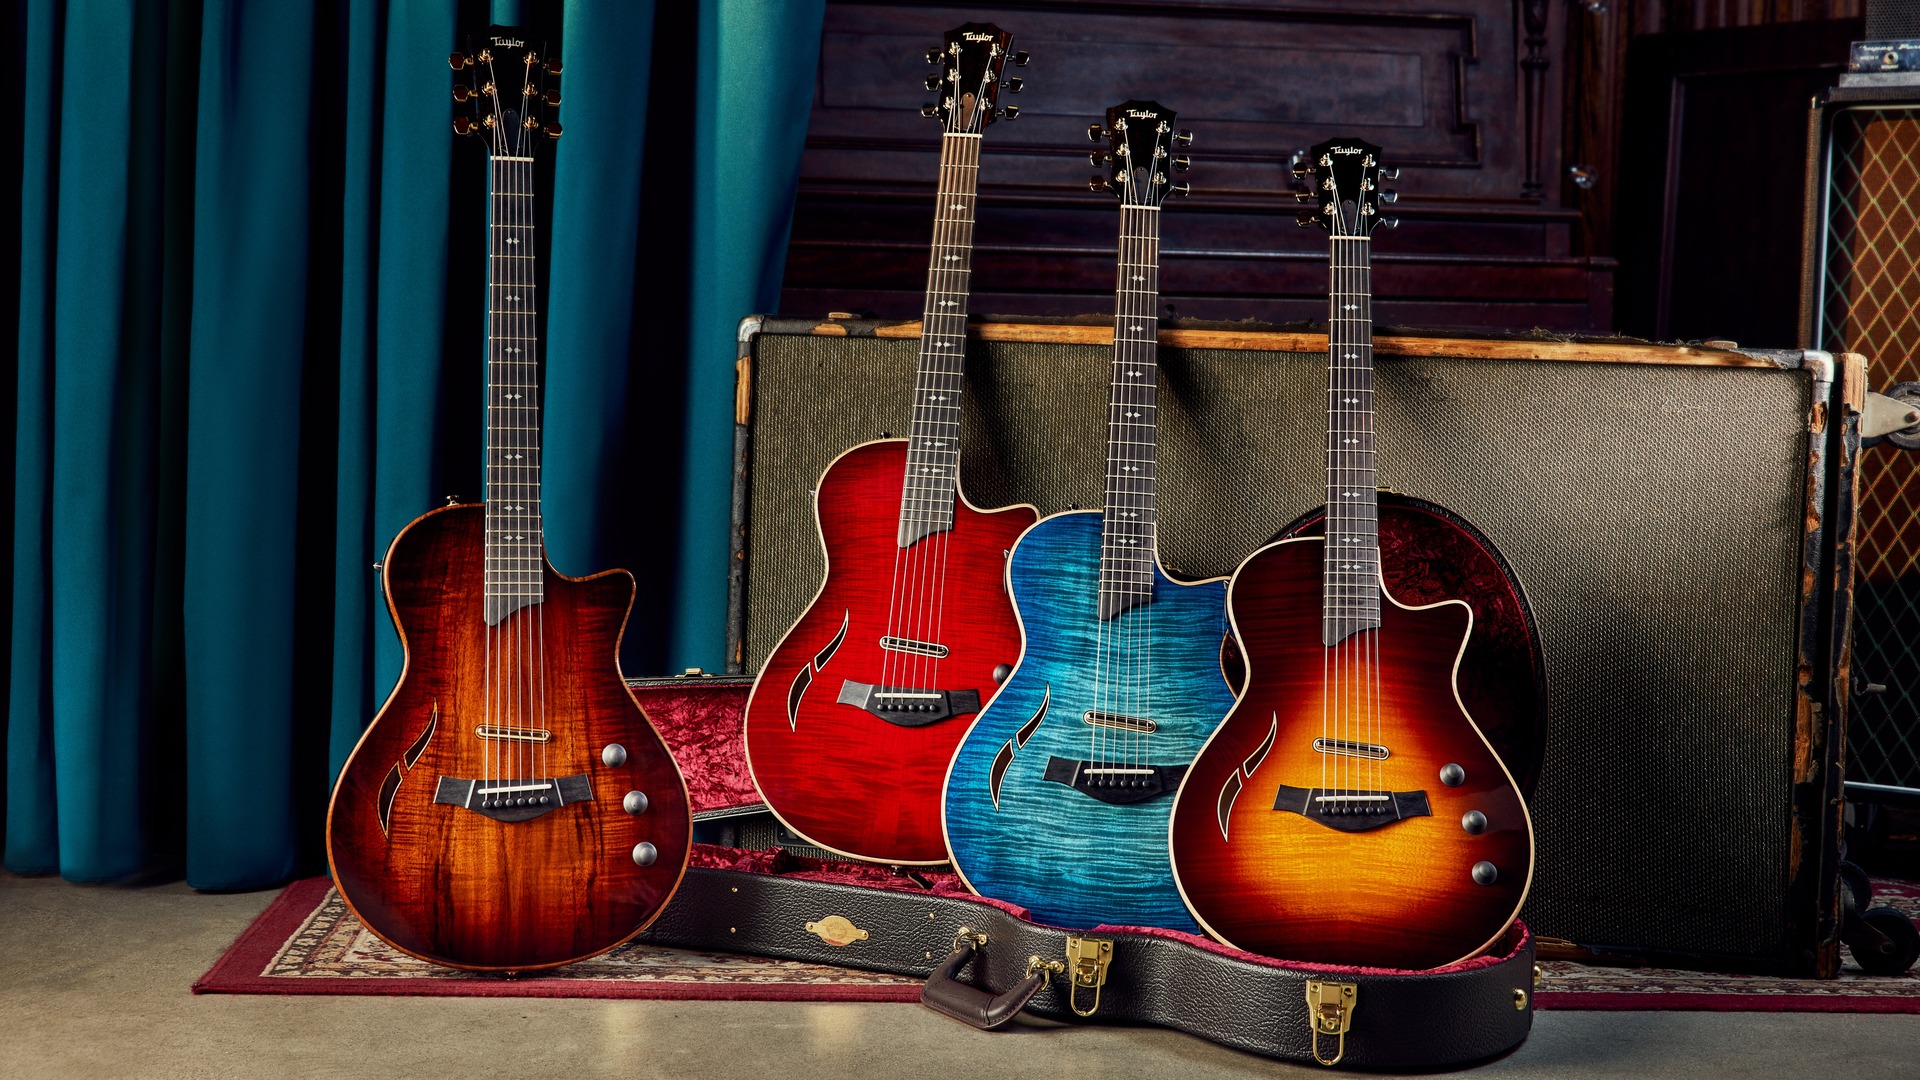 Header image of four Taylor T5z guitars in natural koa, red, blue, and Tobacco Sunburst colors in a music venue setting